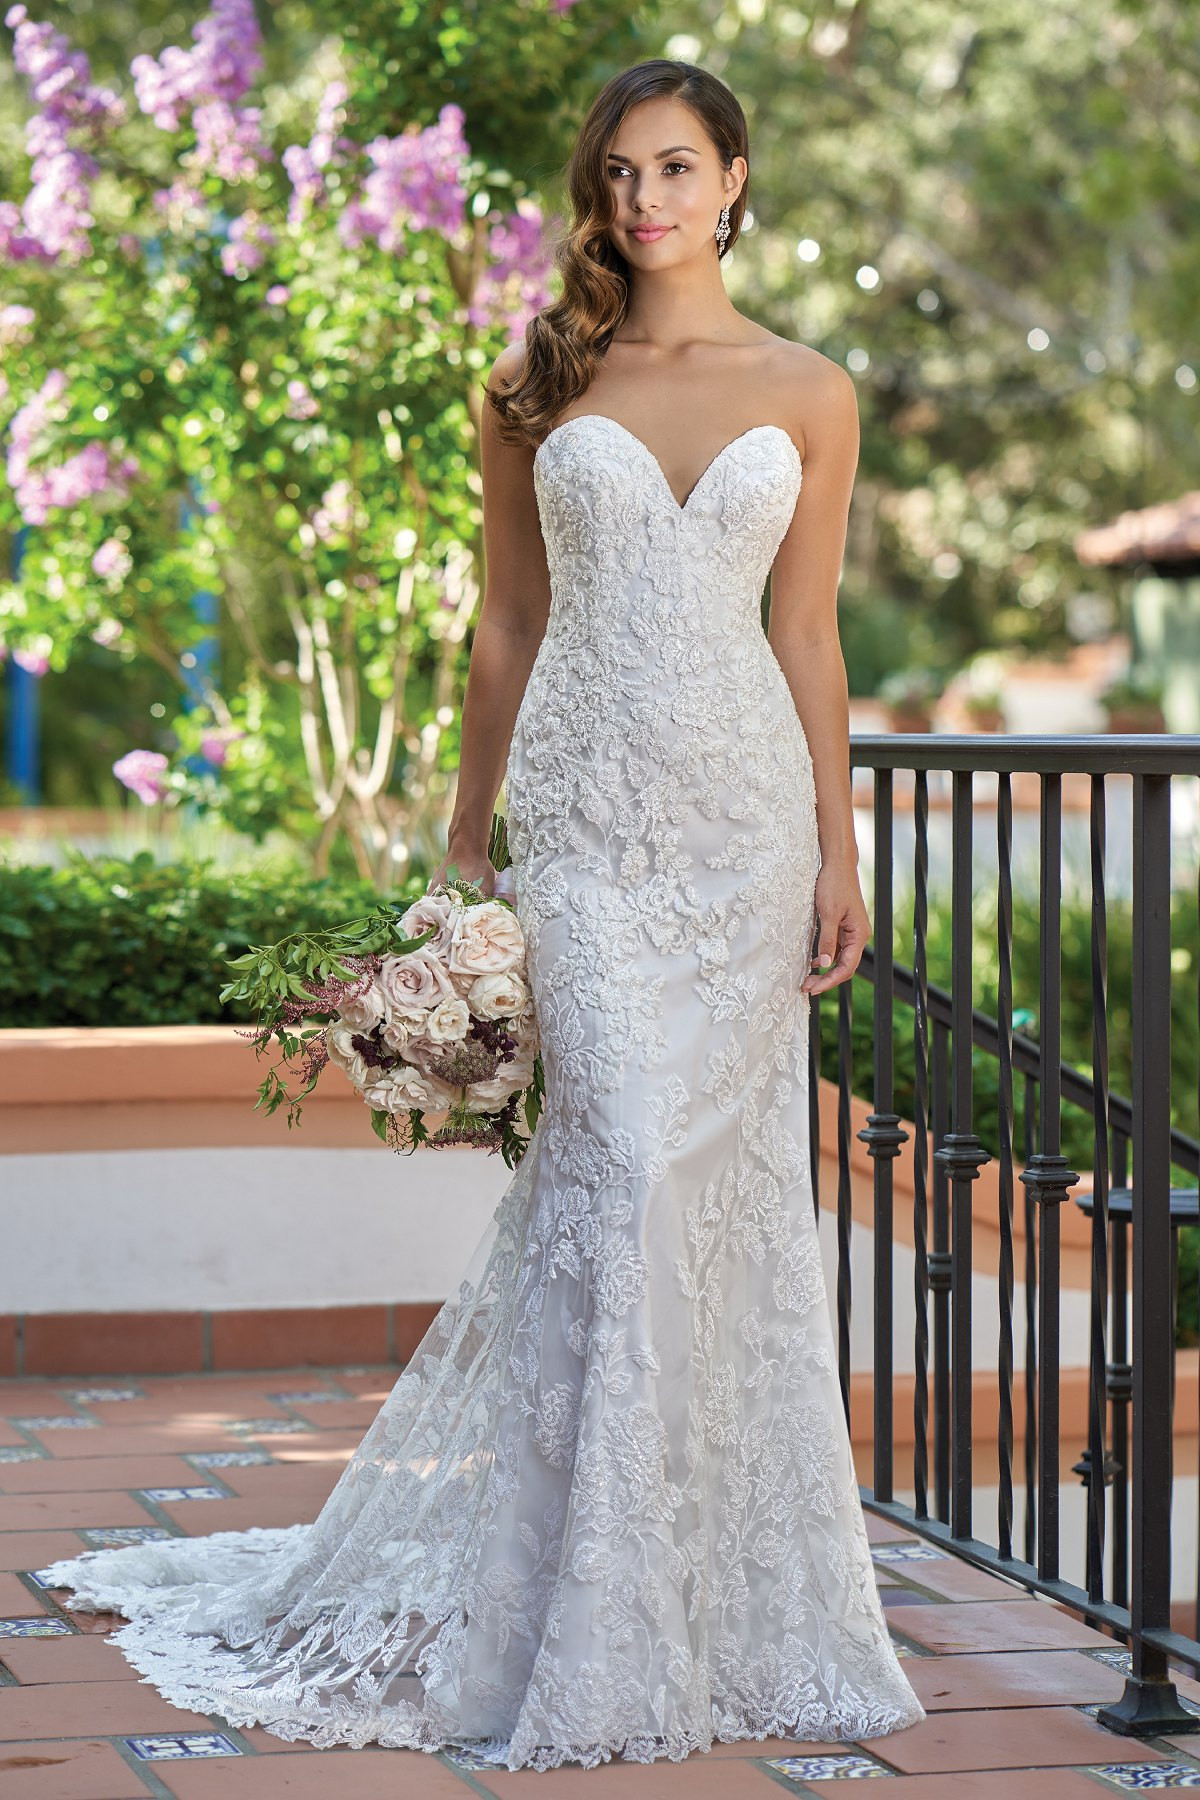 Strapless Wedding Gown
 T Romantic Embroidered Lace Strapless Wedding Dress